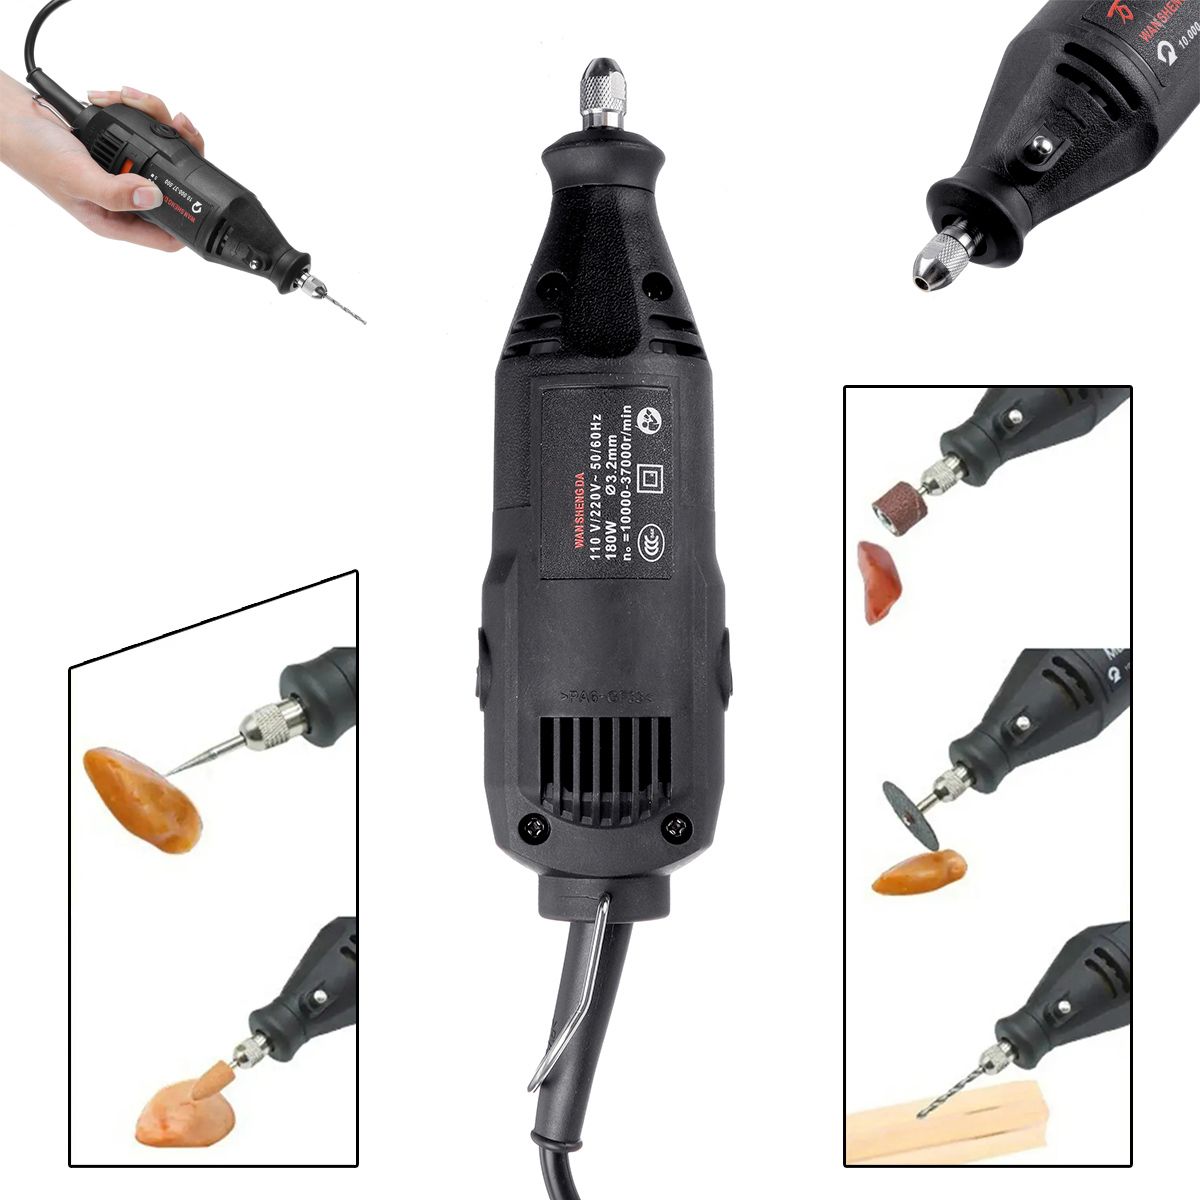 180W-Adjutable-Speed-Electric-Rotary-Drill-Grinder-Engraver-Polisher-DIY-Tool-Electric-Drill-Set-Pol-1703733